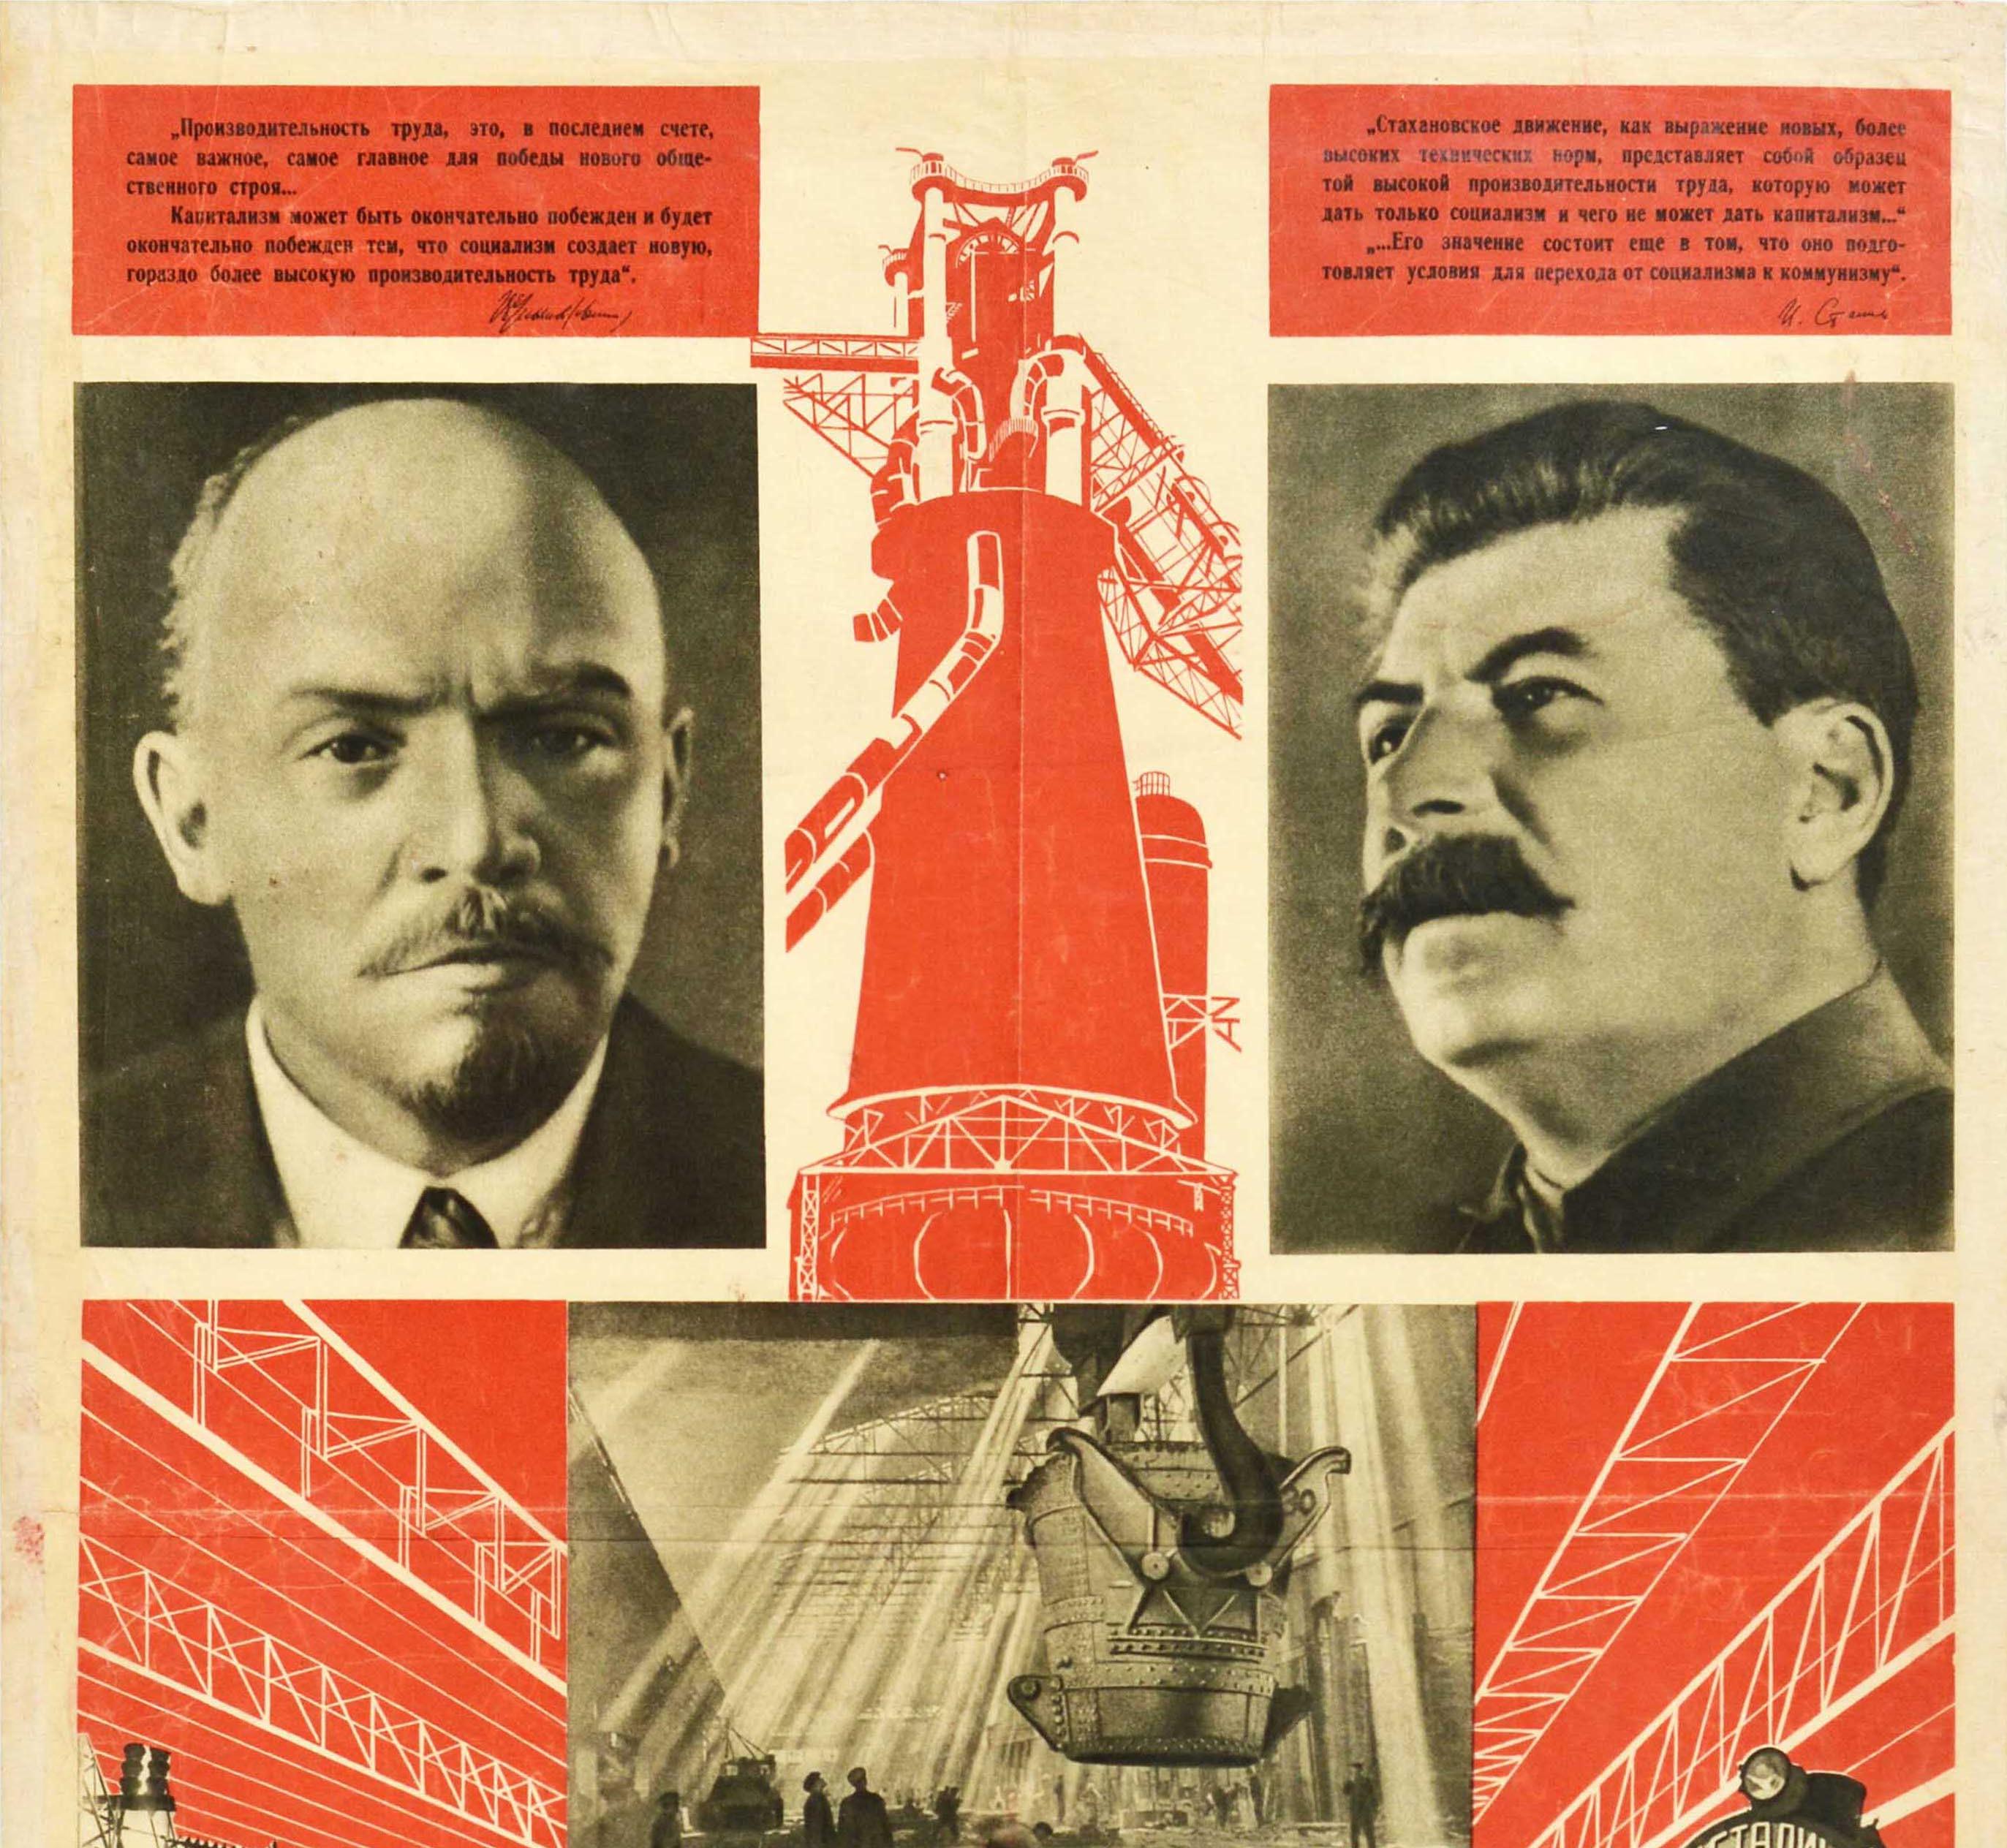 Original vintage Soviet propaganda poster - Socialist industry has become the only form of industry in the USSR - featuring black and white photos of workers in industrial factories with red and white line drawings and a quote by Vladimir Lenin